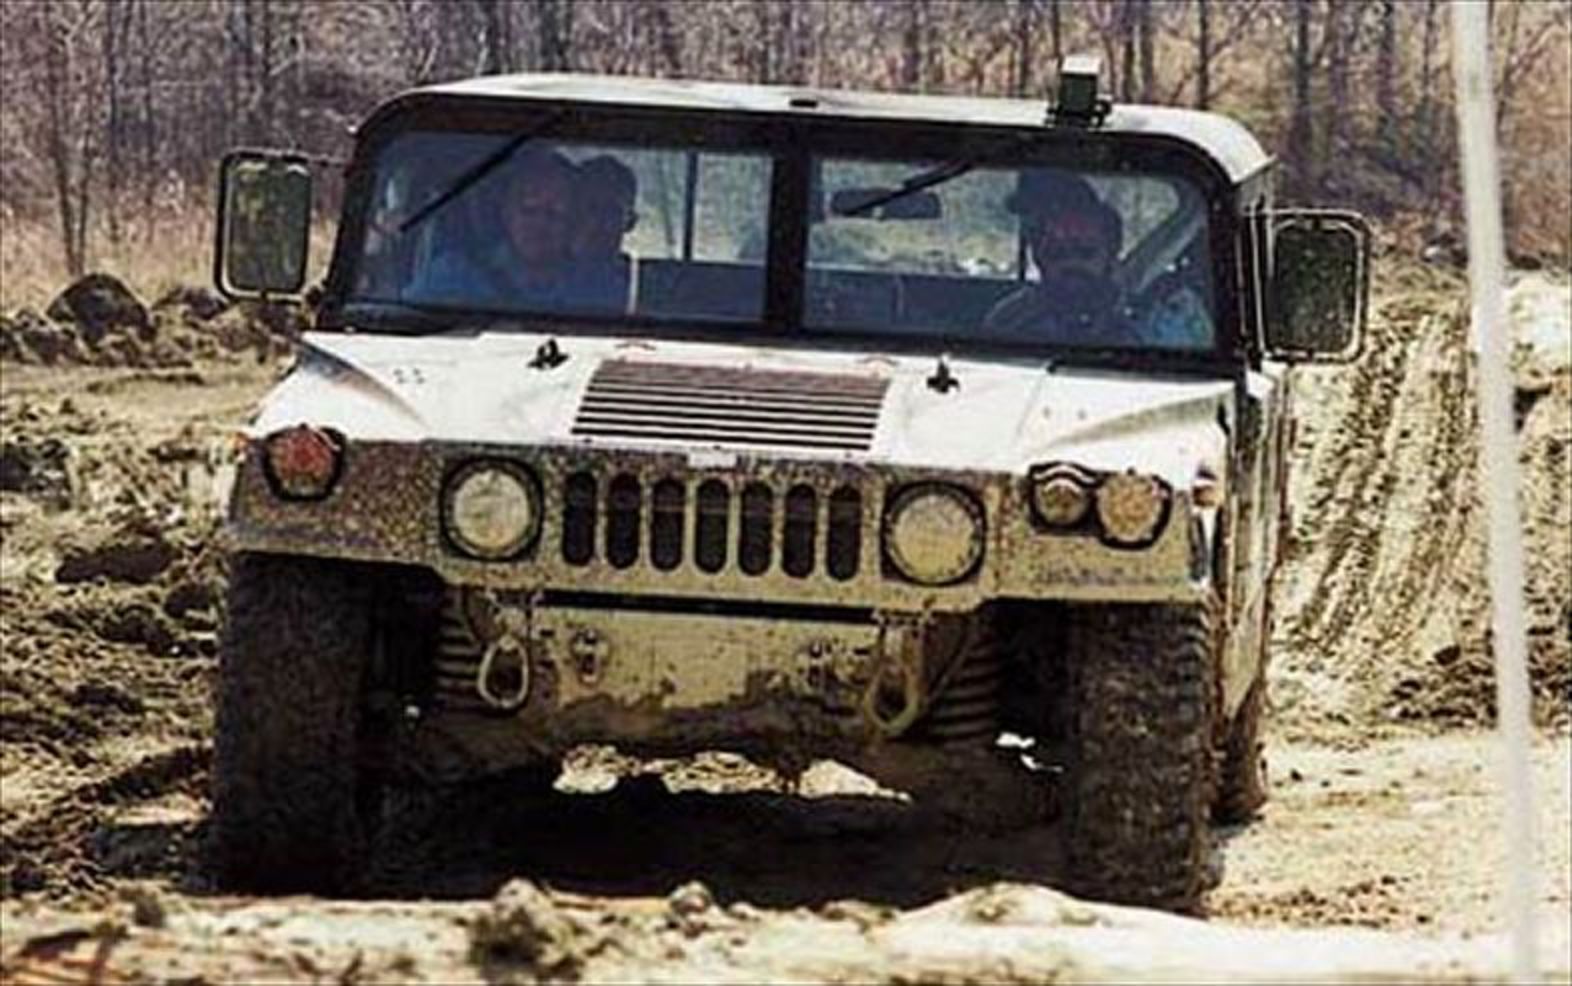 am general hummer related images,51 to 100 - Zuoda Images